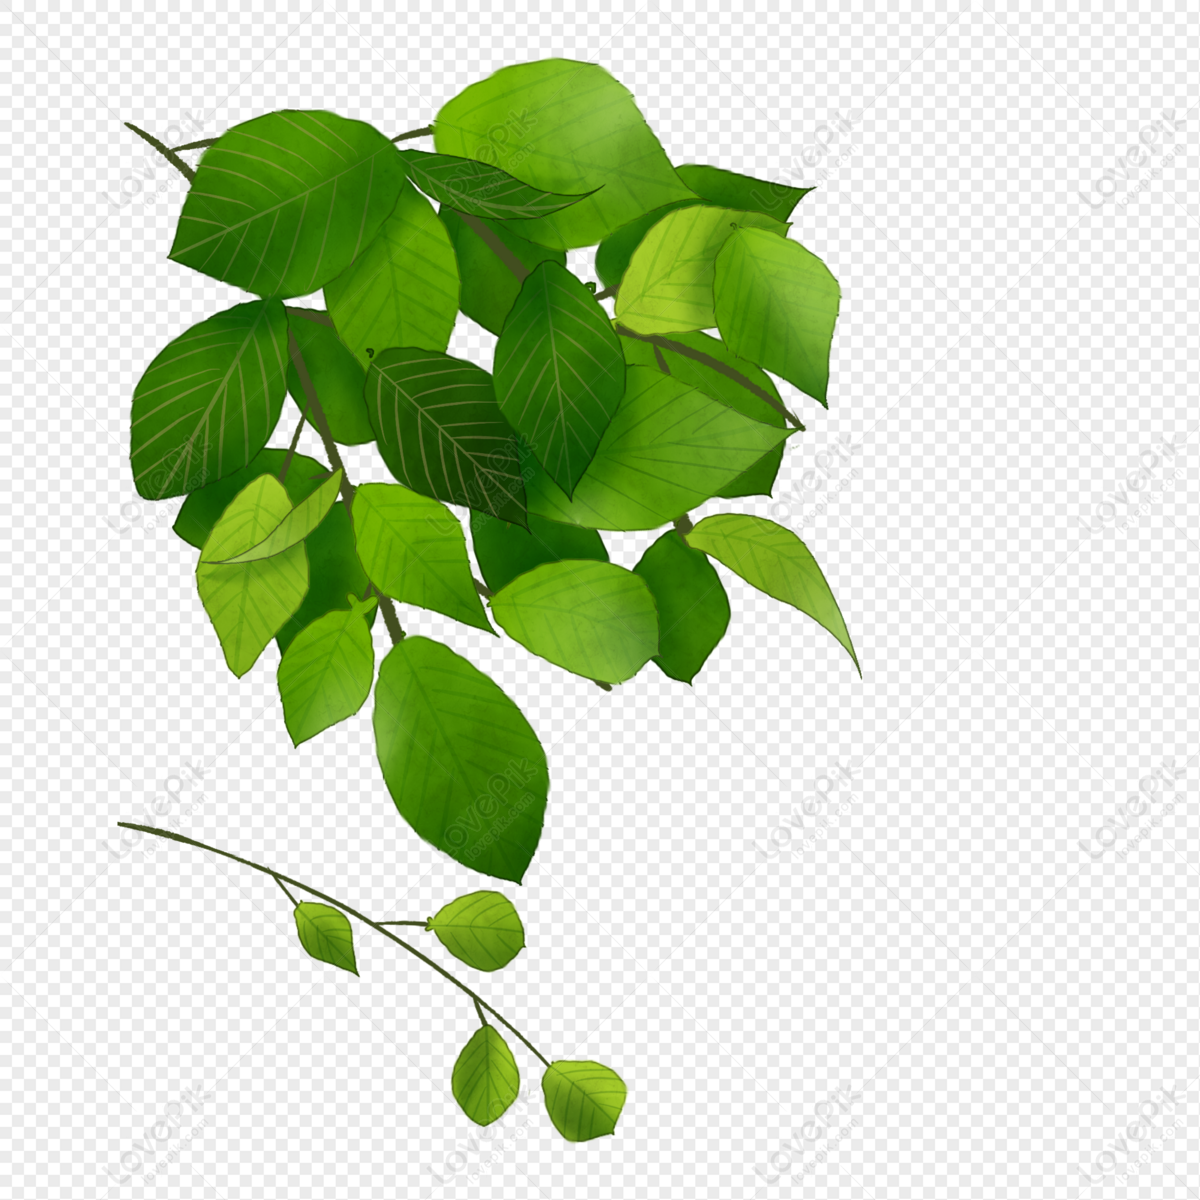 Spring Cartoon Leaves PNG Transparent And Clipart Image For Free Download -  Lovepik | 401569736